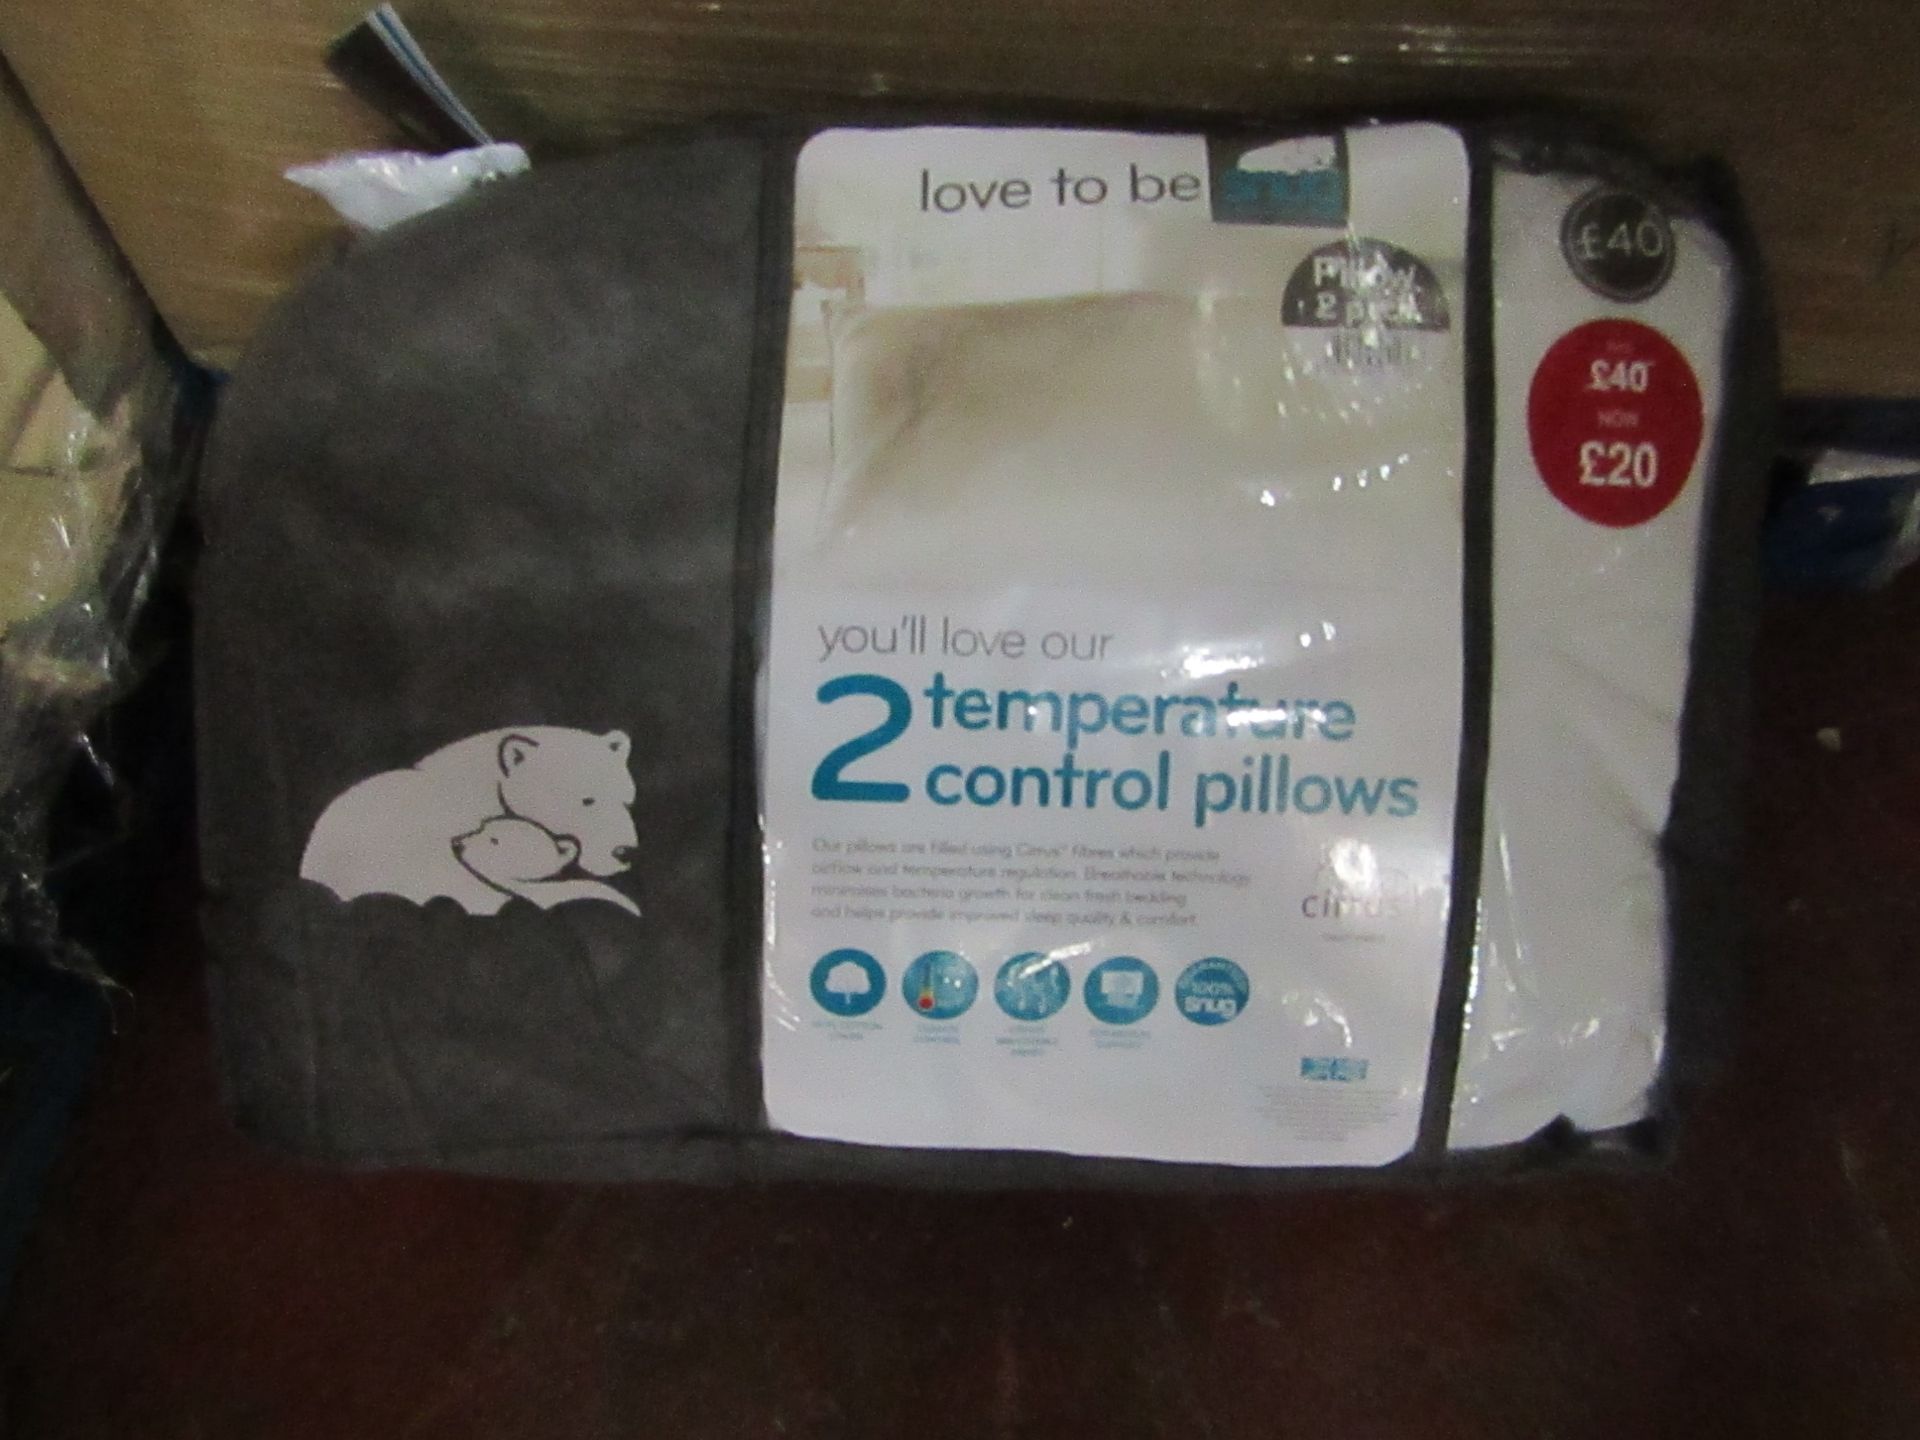 Snug pack of 2 temperature control pillows, brand new and packaged.